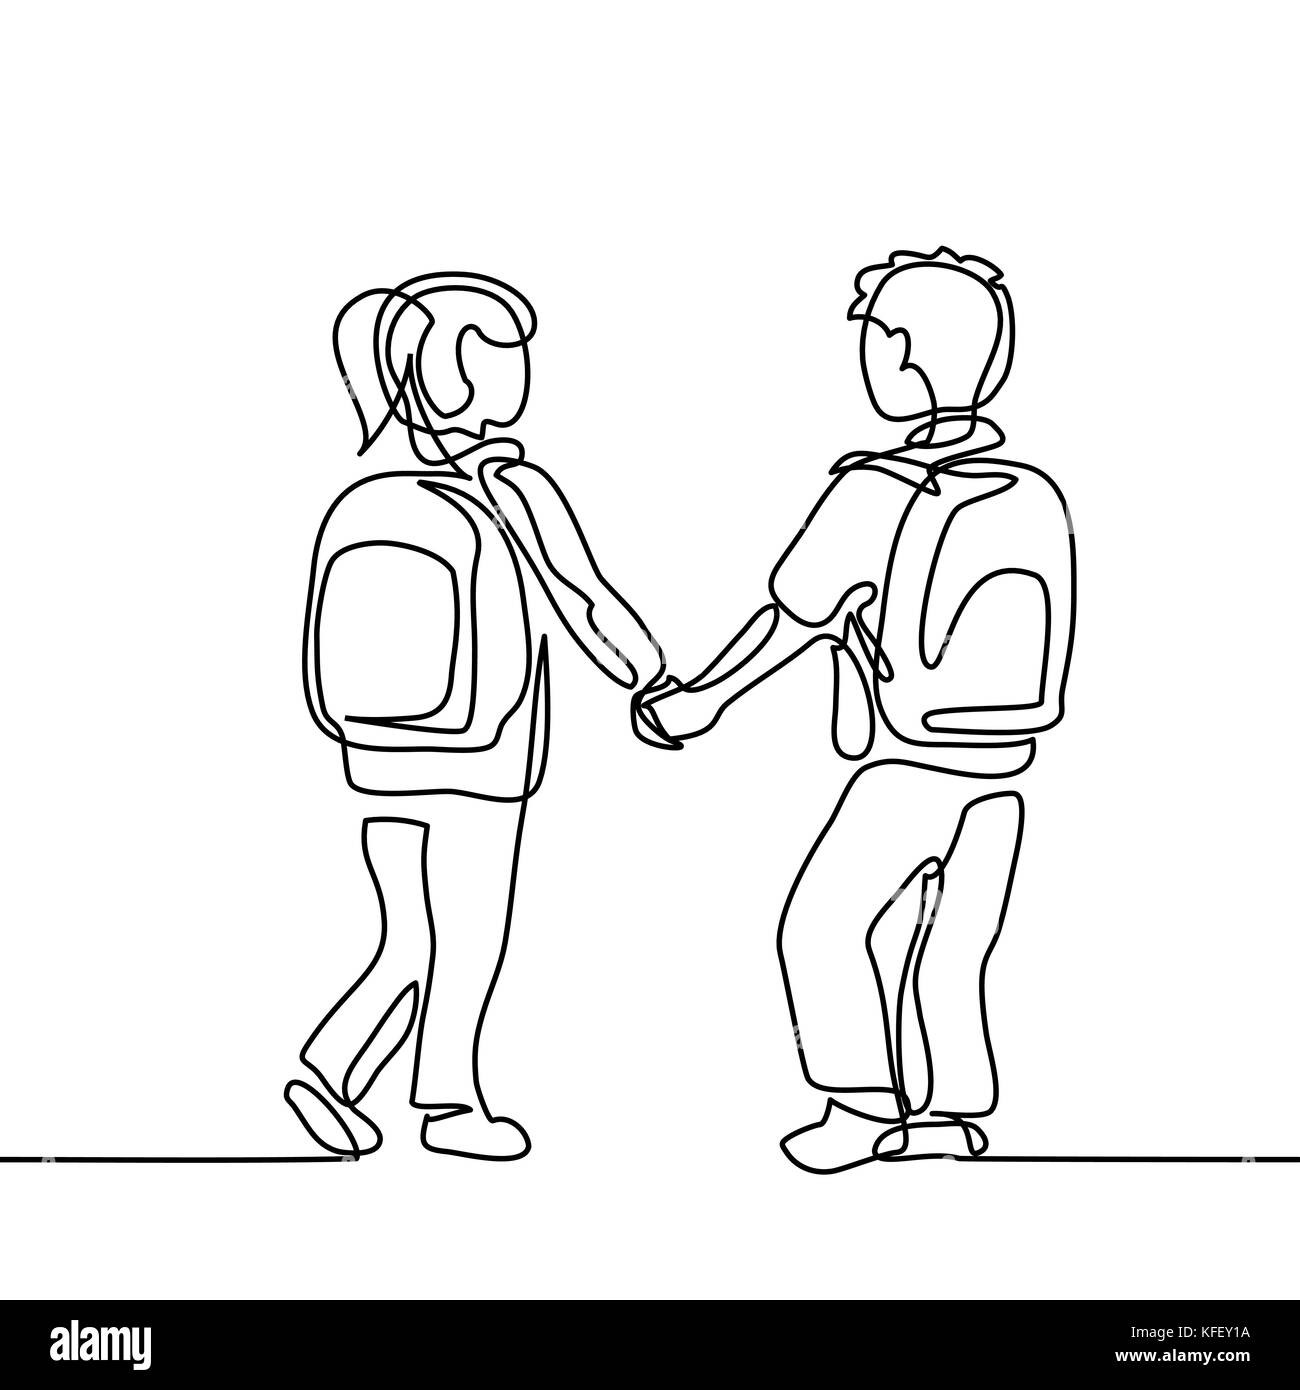 Boy And Girl Going Back To School With Bags Continuous Line Drawing Vector Illustration On White Background Stock Vector Image Art Alamy